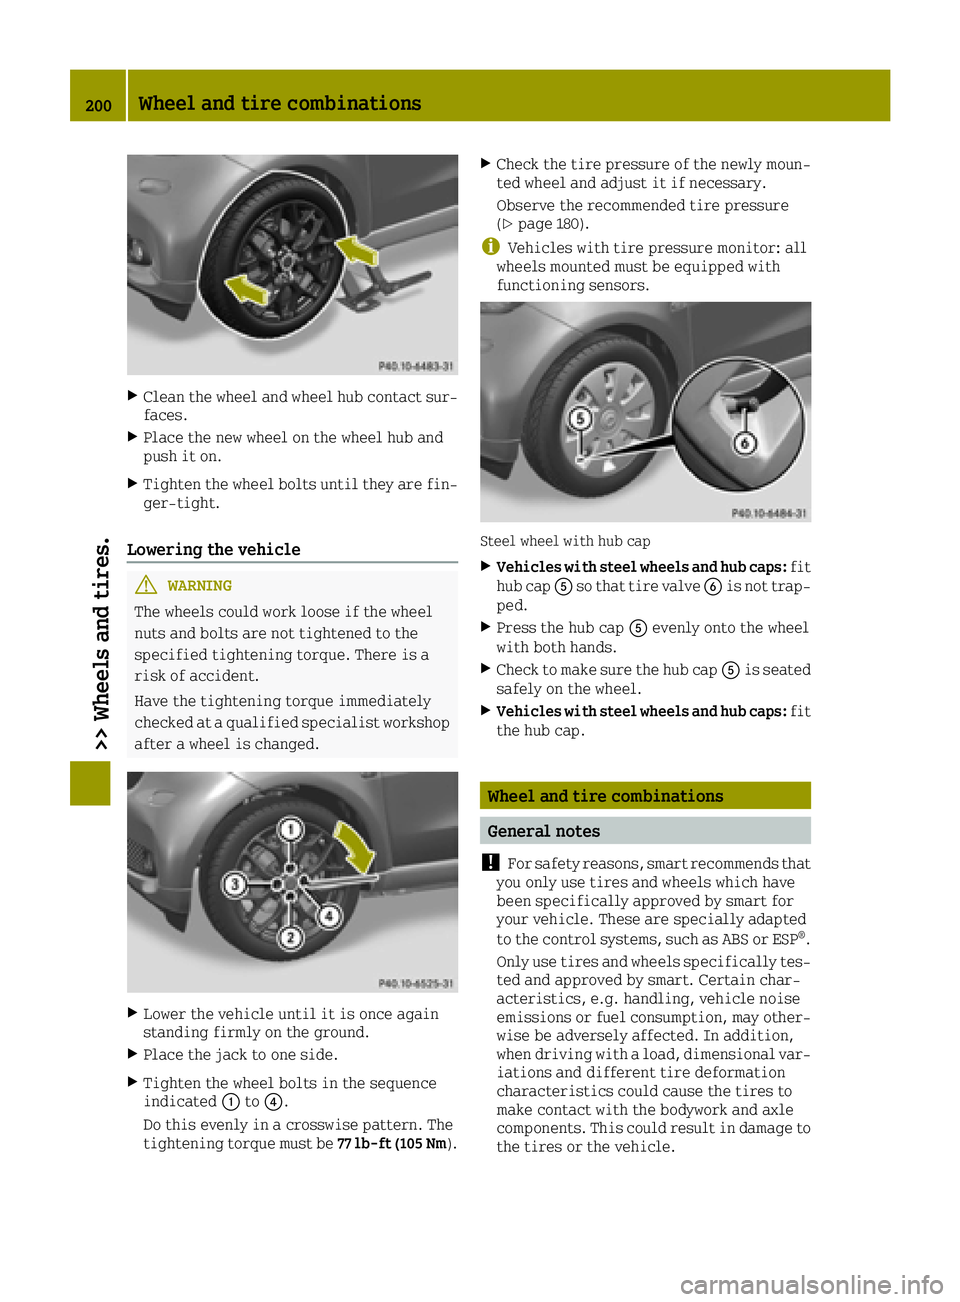 SMART FORTWO 2016  Owners Manual XClean the wheel and wheel hub contact sur-faces.
XPlace the new wheel on the wheel hub and
push it on.
XTighten the wheel bolts until they are fin-
ger-tight.
Lowering the vehicle
GWARNING
The wheels